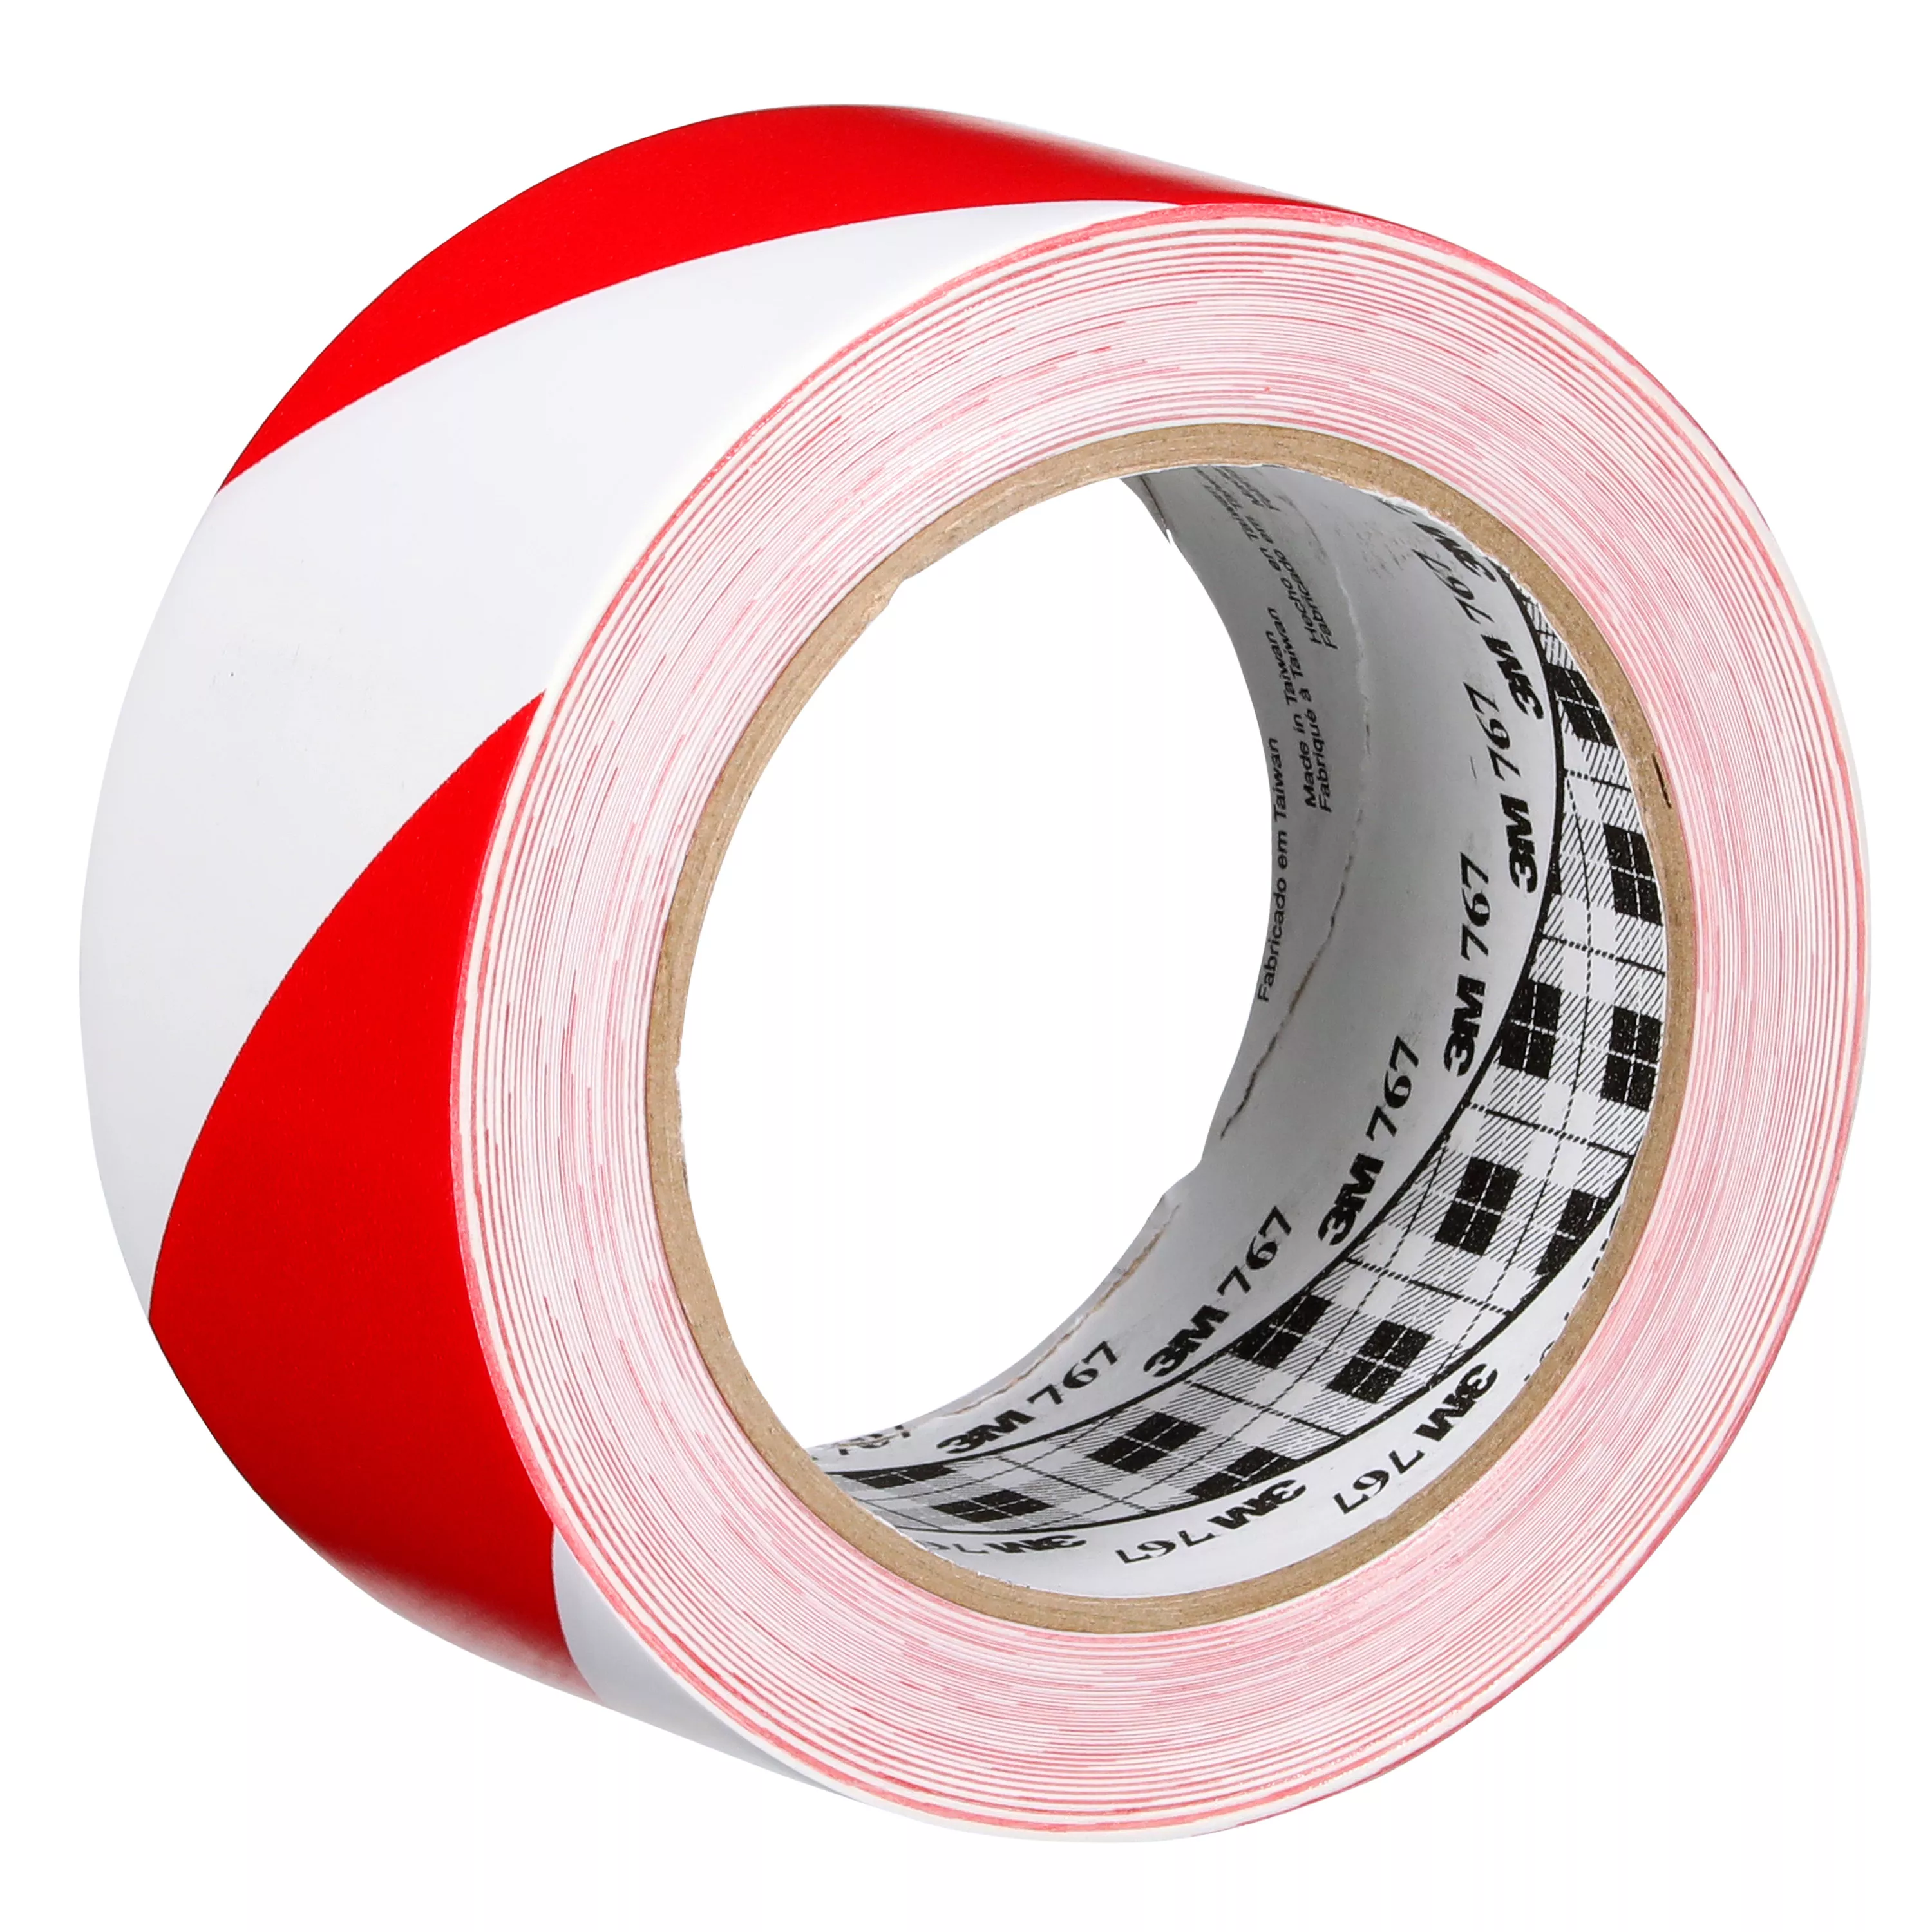 3M™ Safety Stripe Vinyl Tape 767, Red/White, 3 in x 36 yd, 5 mil, 12 Roll/Case, Individually Wrapped Conveniently Packaged